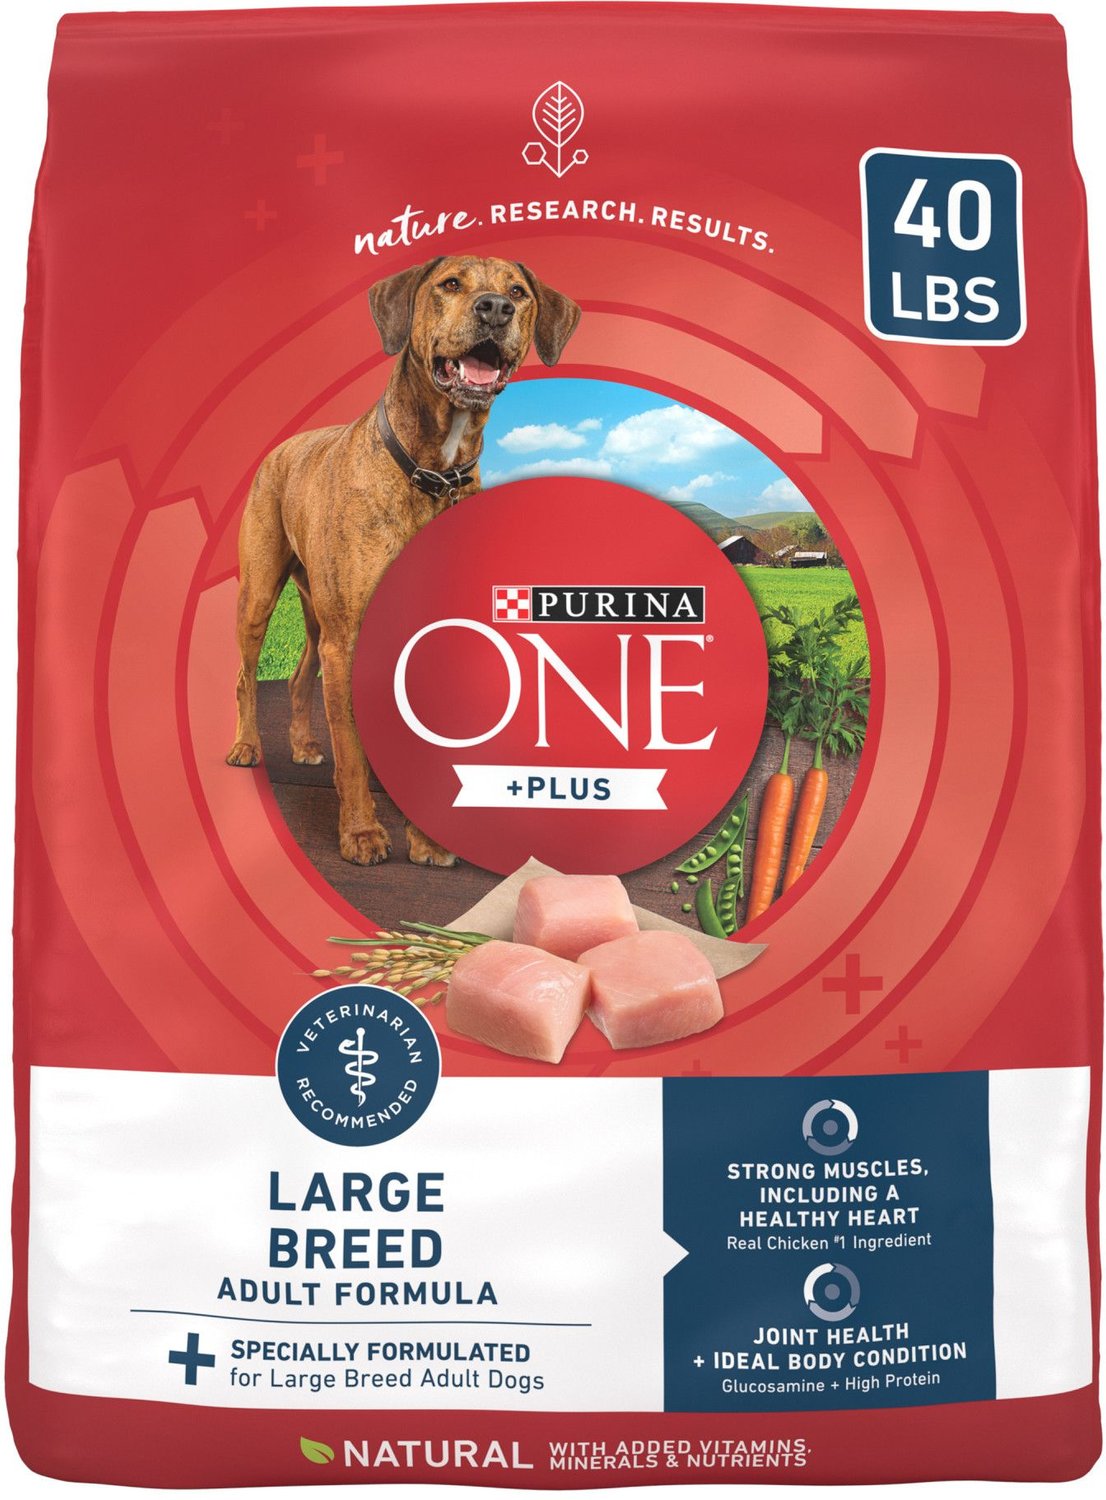 Aanpassing commando Slaapkamer PURINA ONE Natural Large Breed +Plus Formula Dry Dog Food, 40-lb bag -  Chewy.com